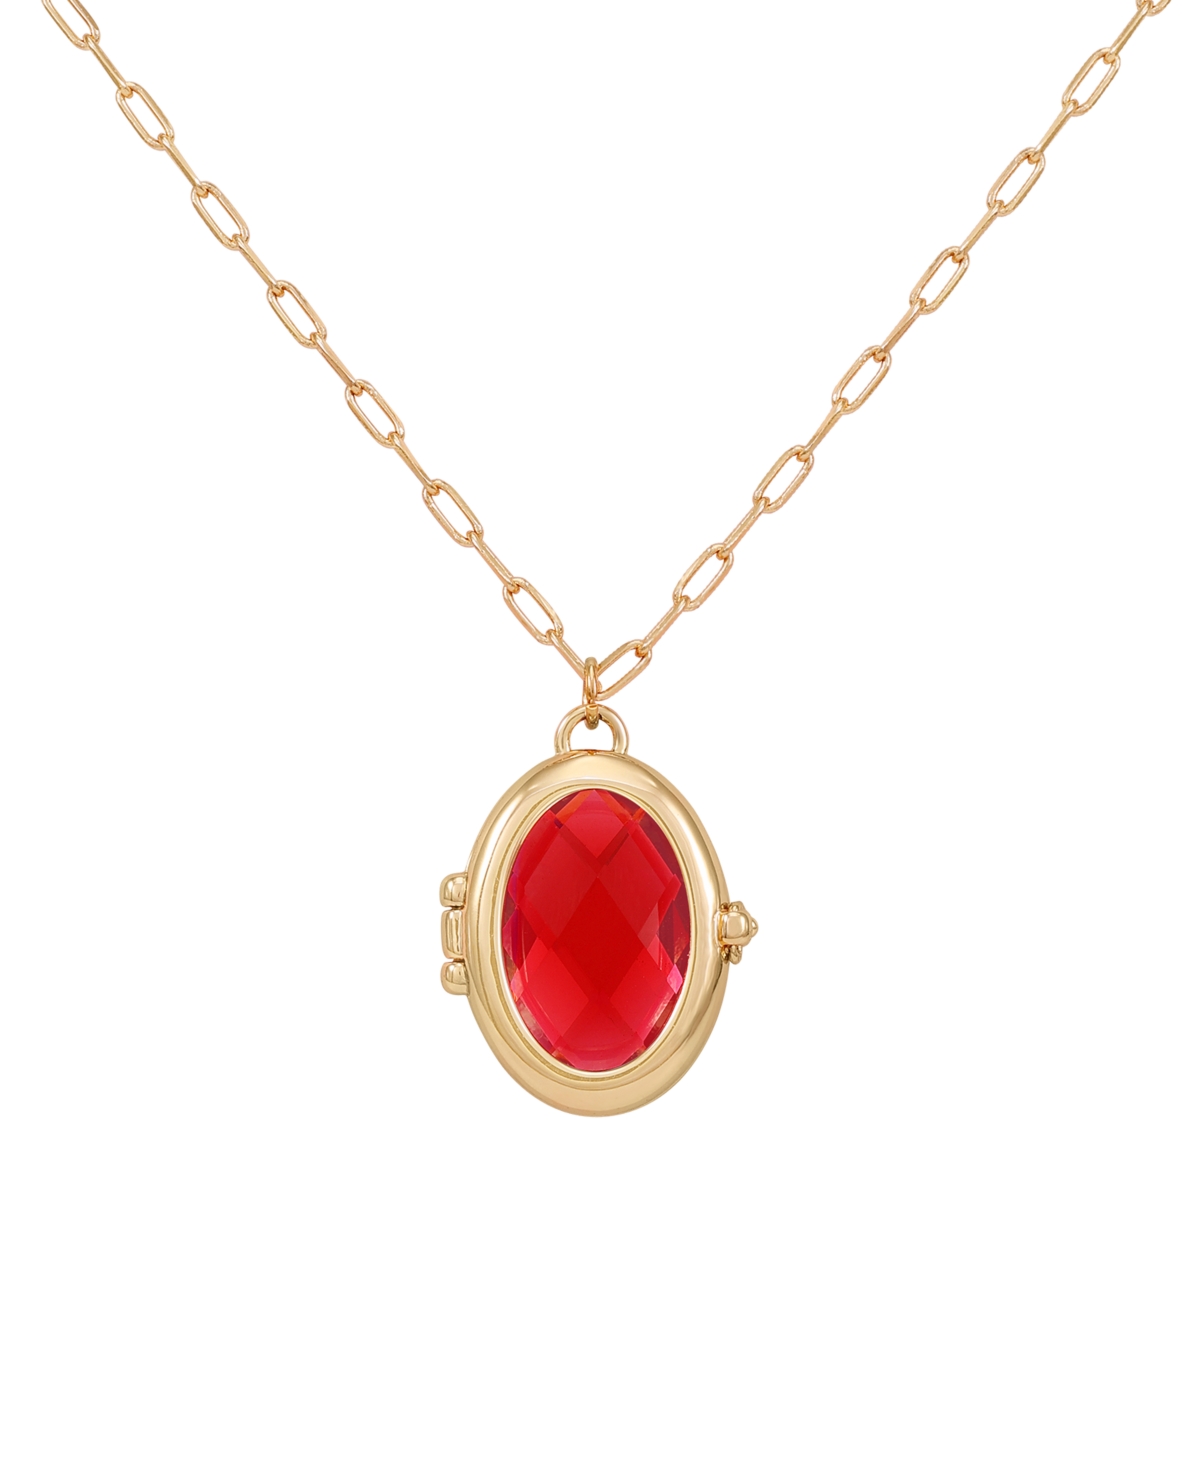 Guess Gold-tone Removable Stone Oval Locket Pendant Necklace, 18" + 3" Extender In Ruby